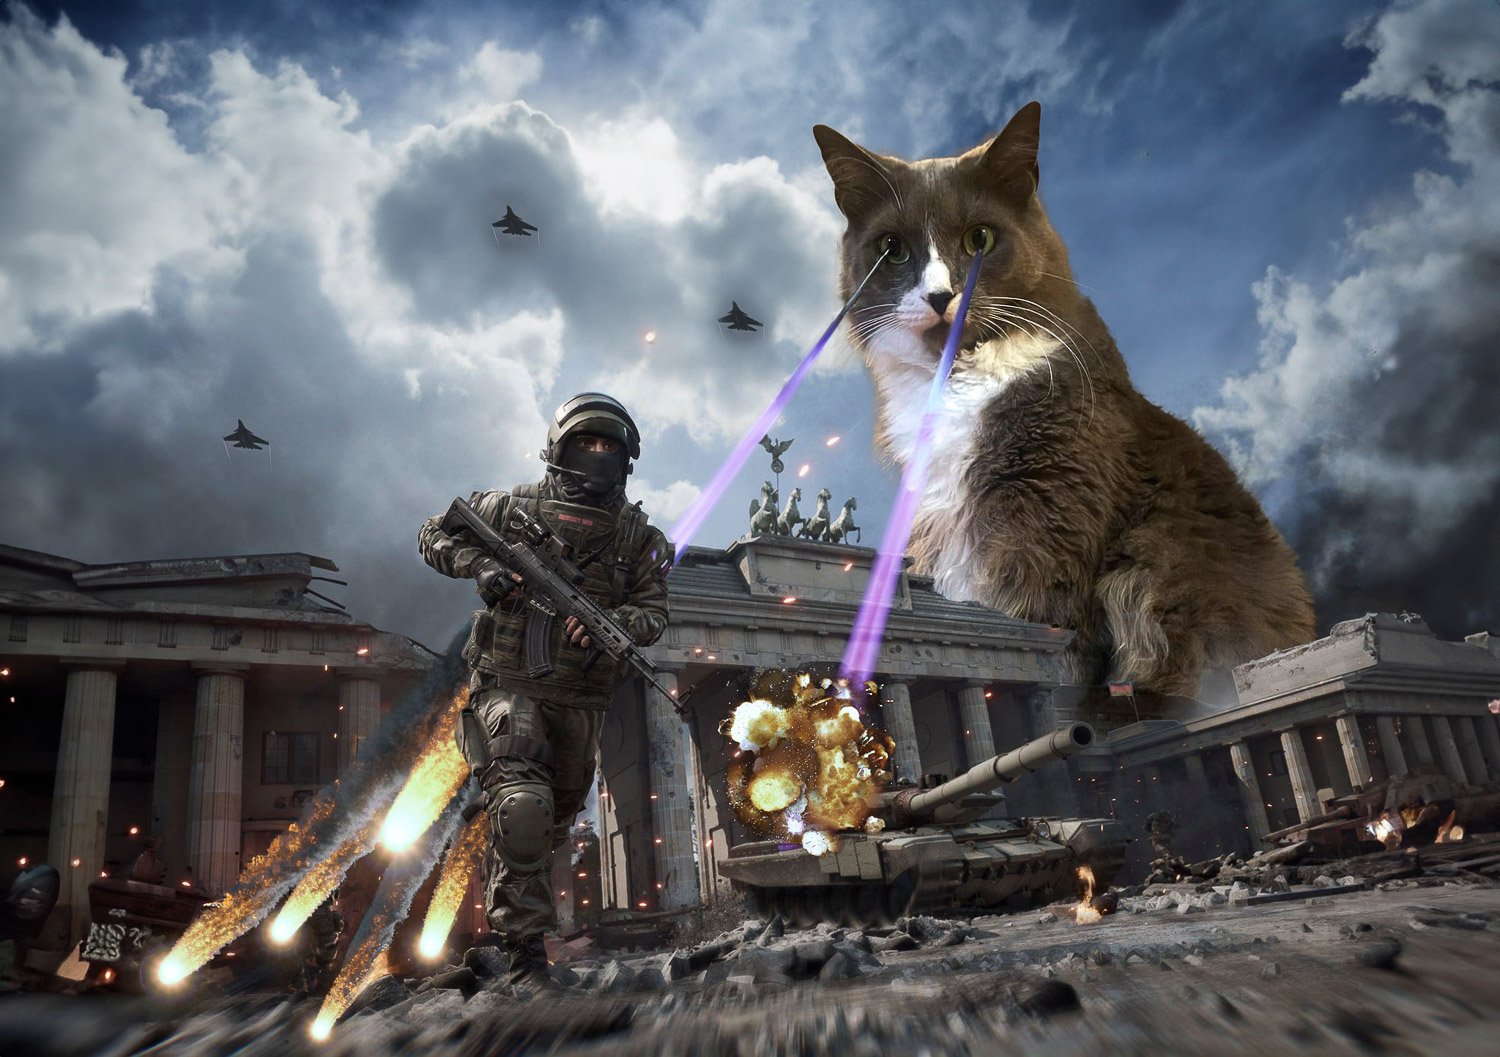 A giant cat with laser eyes fighting soldiers